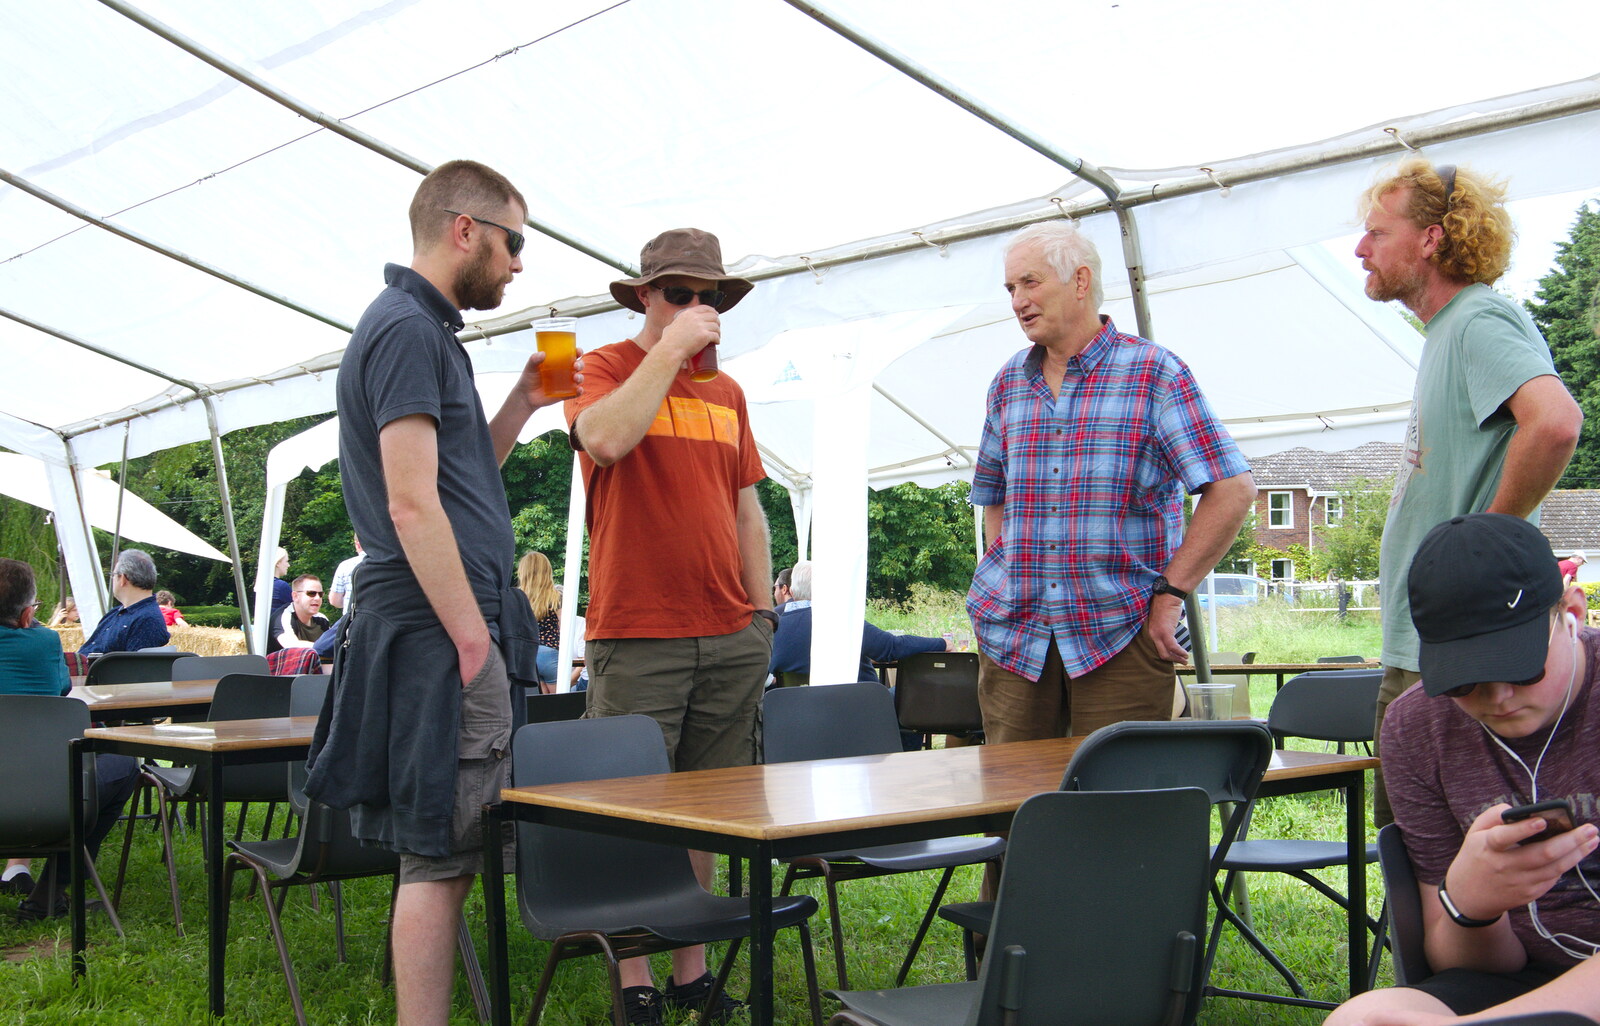 Phil and Paul chat to a local from A Hog Roast on Little Green, Thrandeston, Suffolk - 23rd June 2019